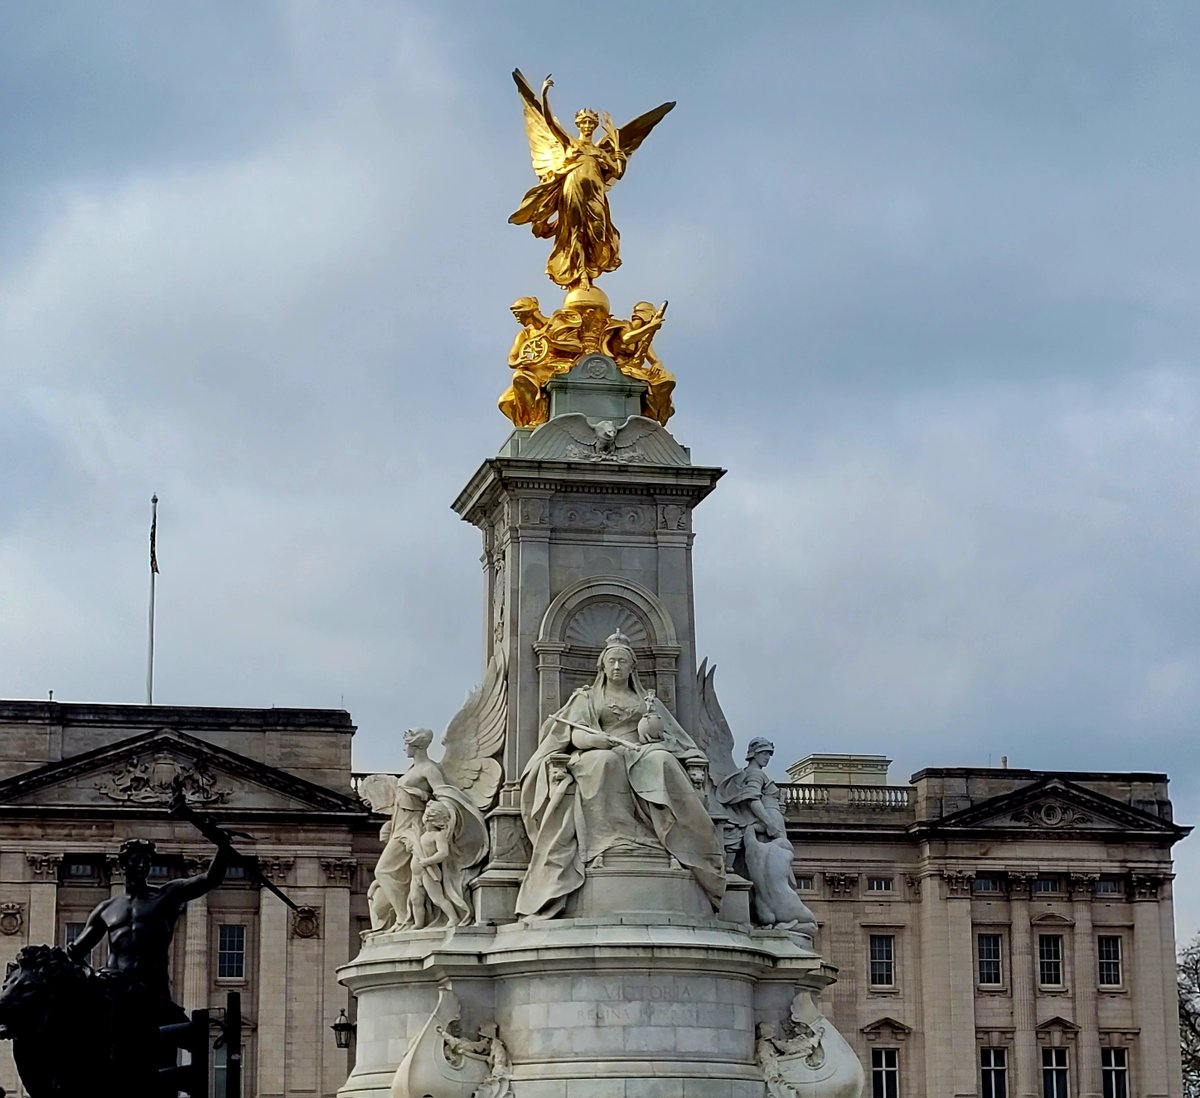 Wednesday, 24th April Today's Daily Picture Theme is 'Immortalised' RT or reply with your own photo Tomorrow's theme will be 'Job' #DailyPictureTheme Queen Victoria, #immortalised outside Buckingham Palace